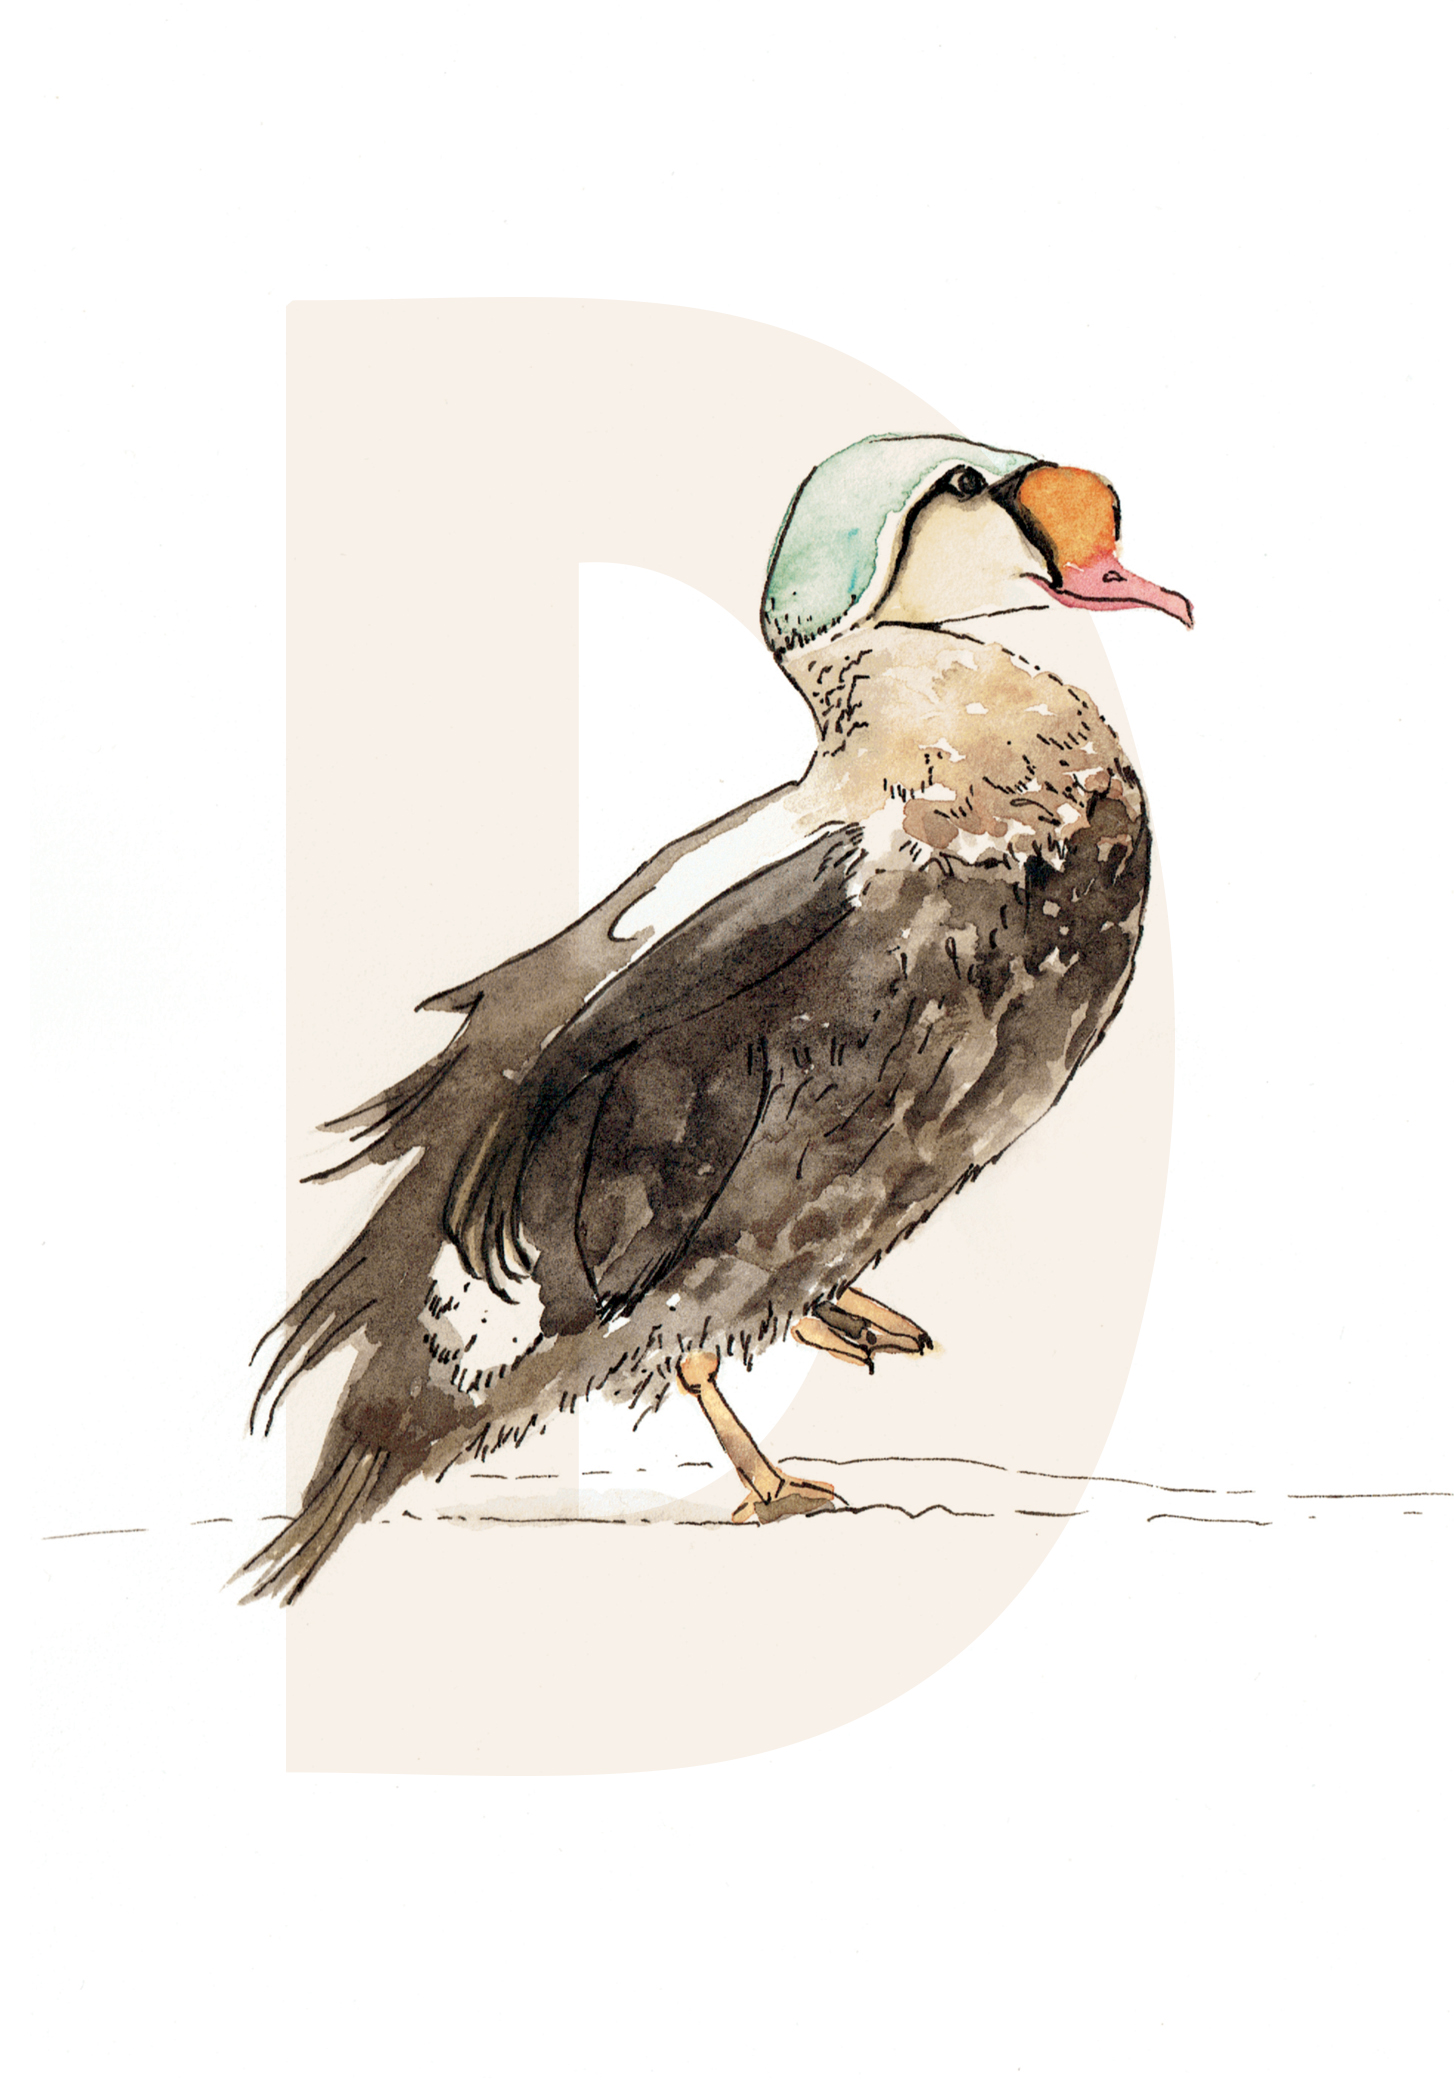 D is for Duck (Eider Duck)